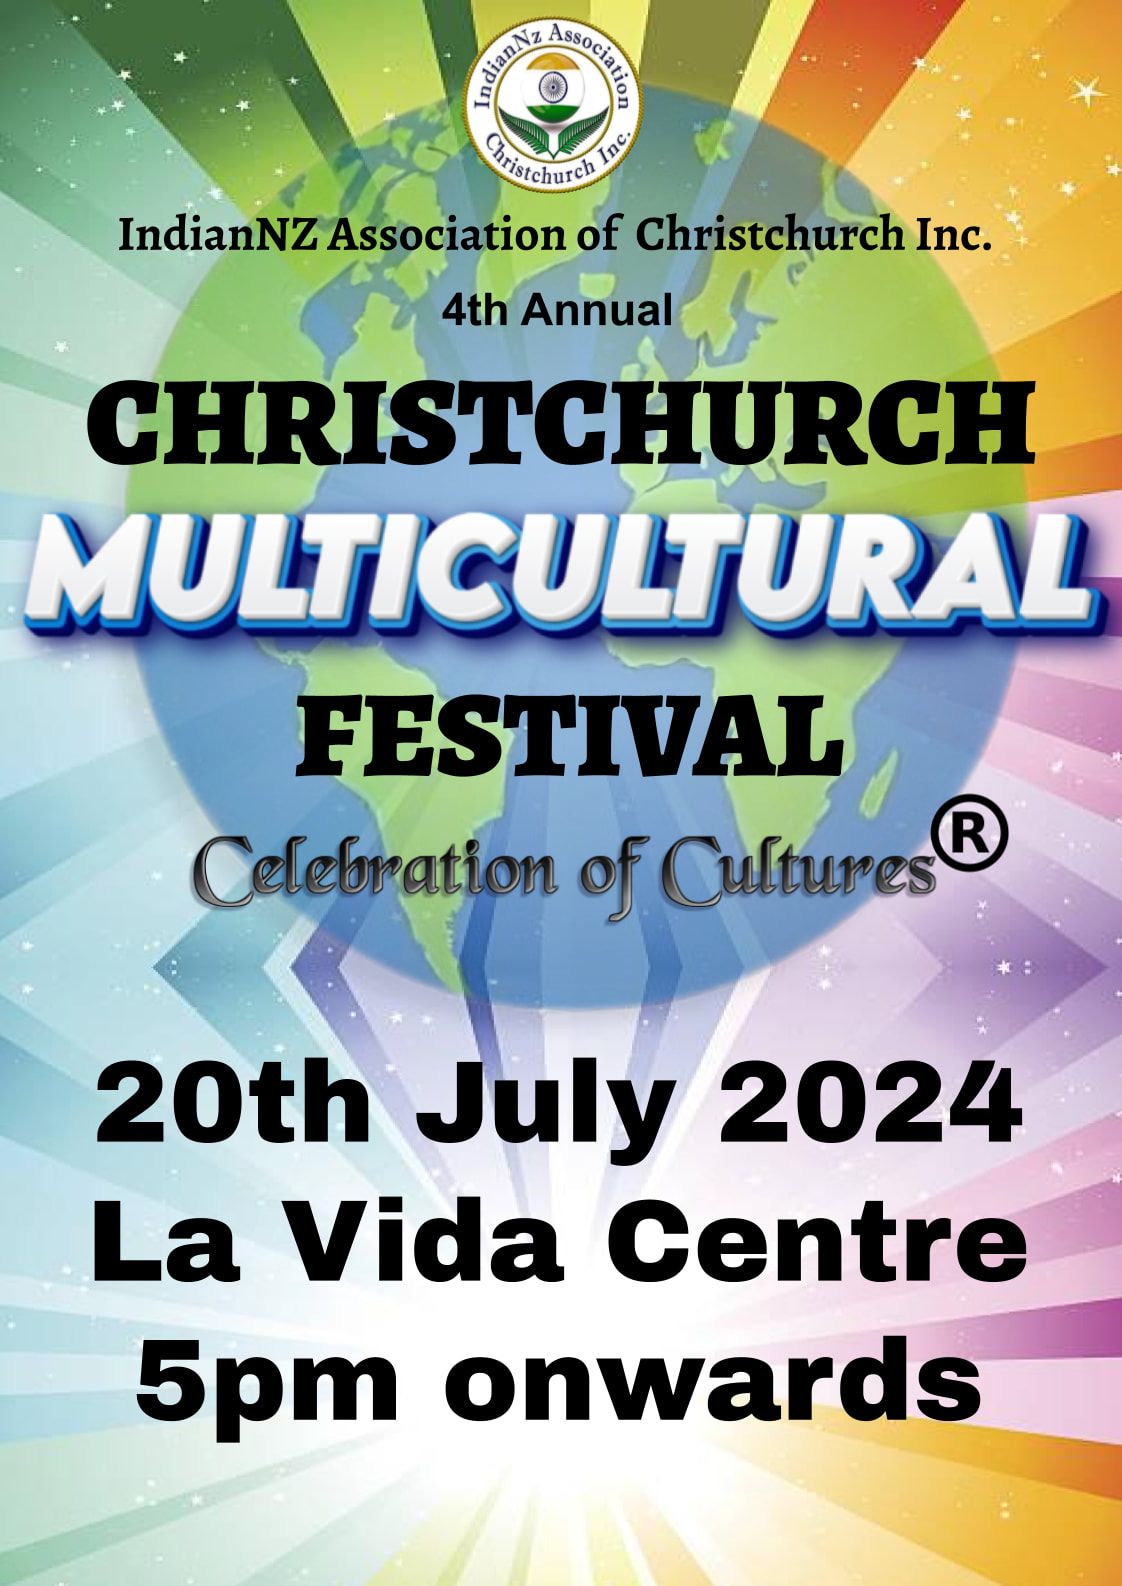 Christchurch Multicultural Festival - Celebration of Cultures (Free Entry)